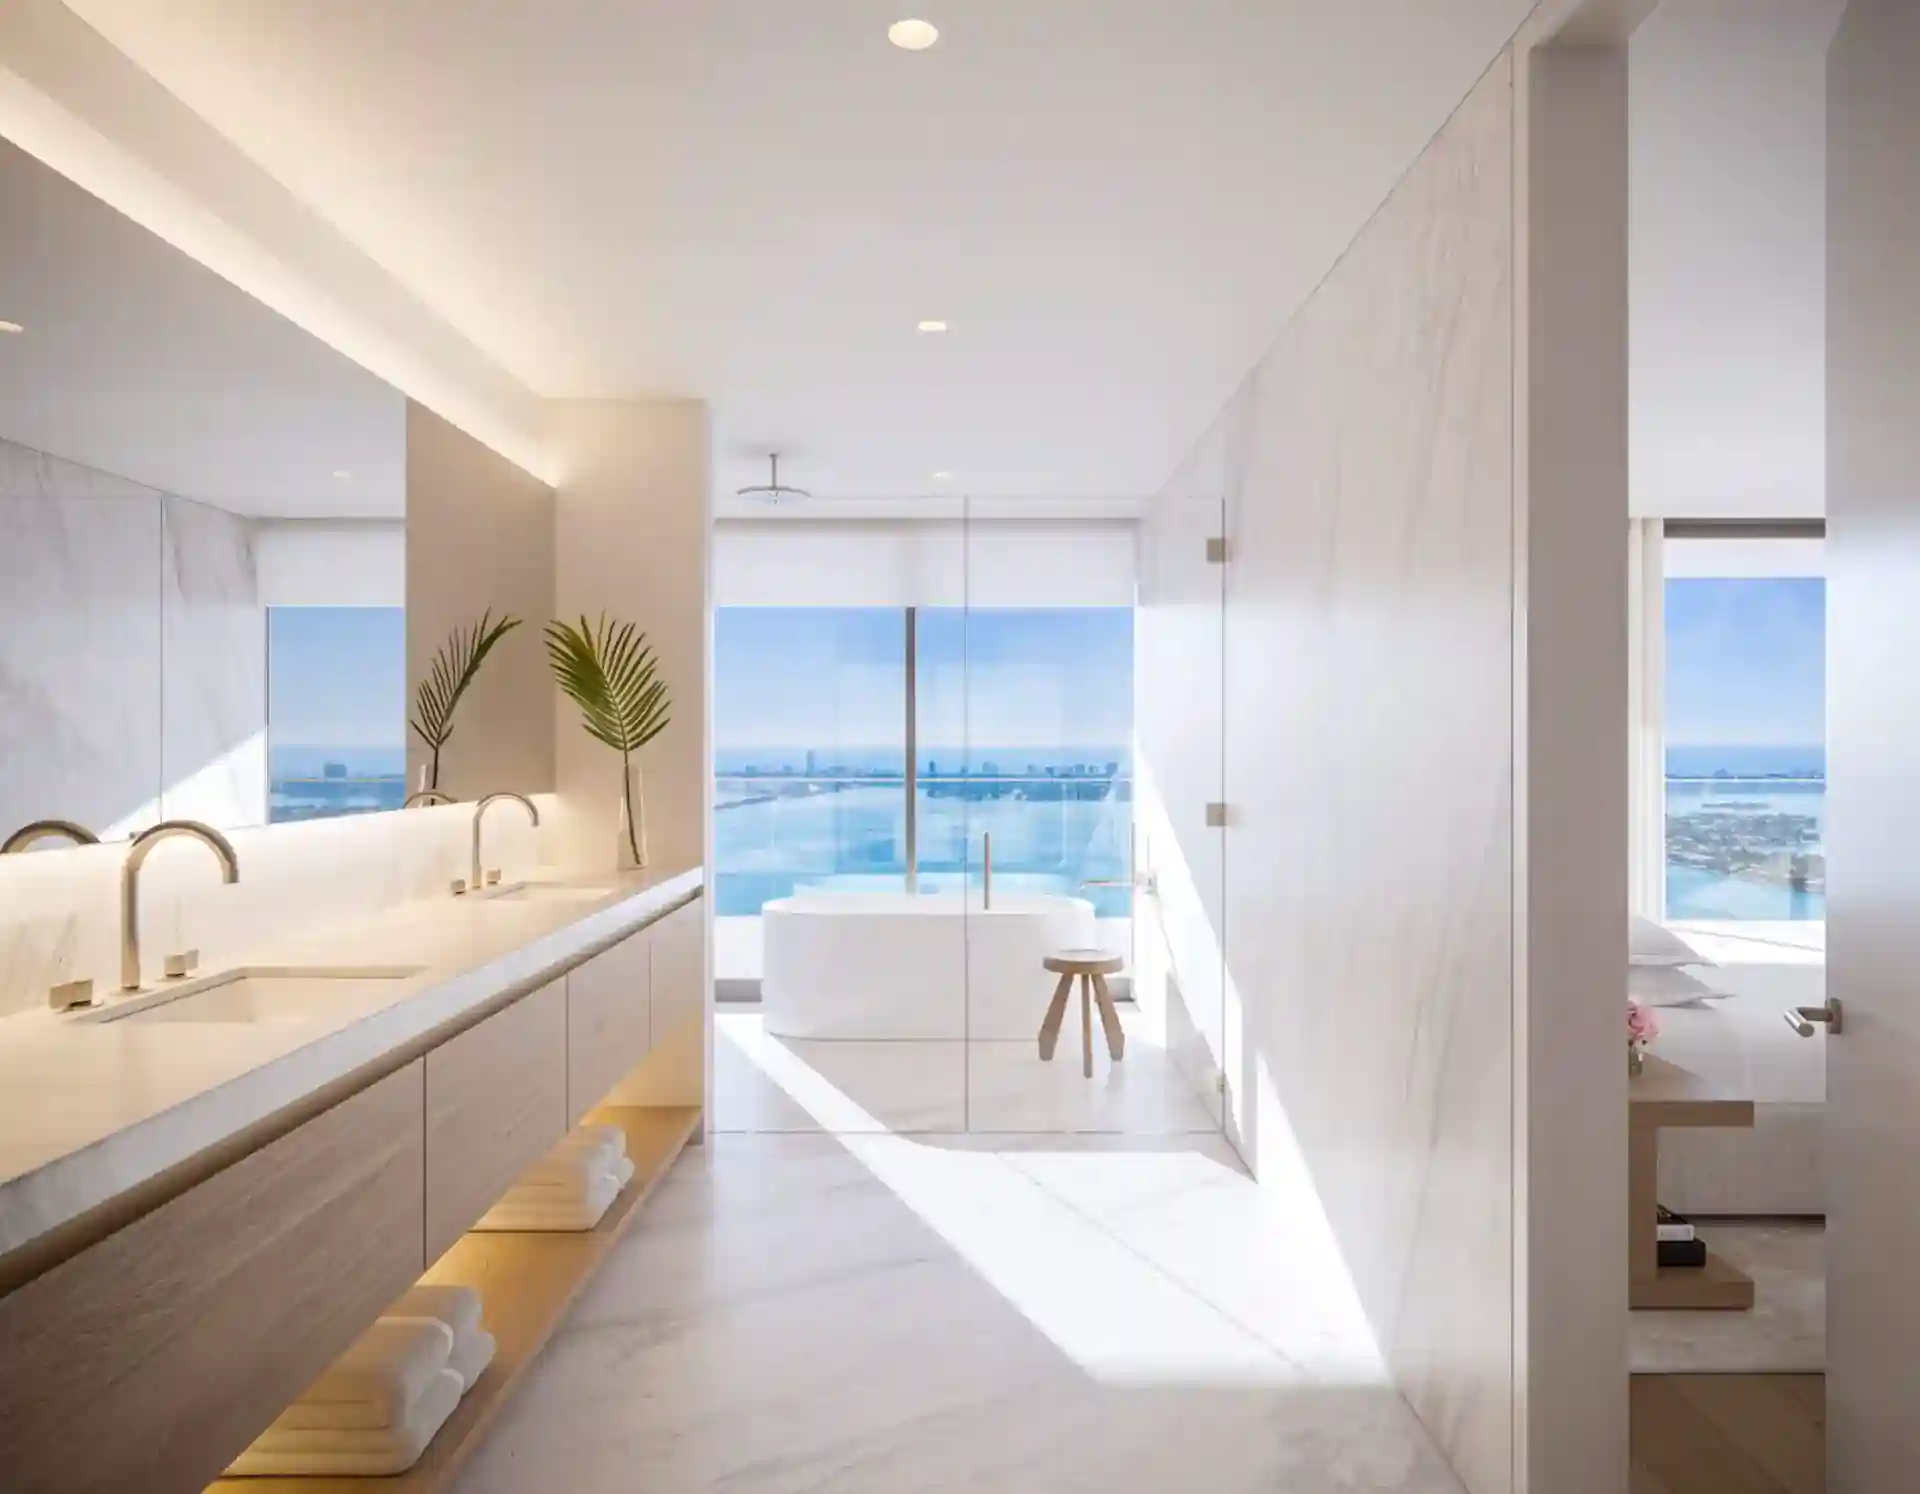 Bathroom with bathtub and beautiful fittings and glass windows.